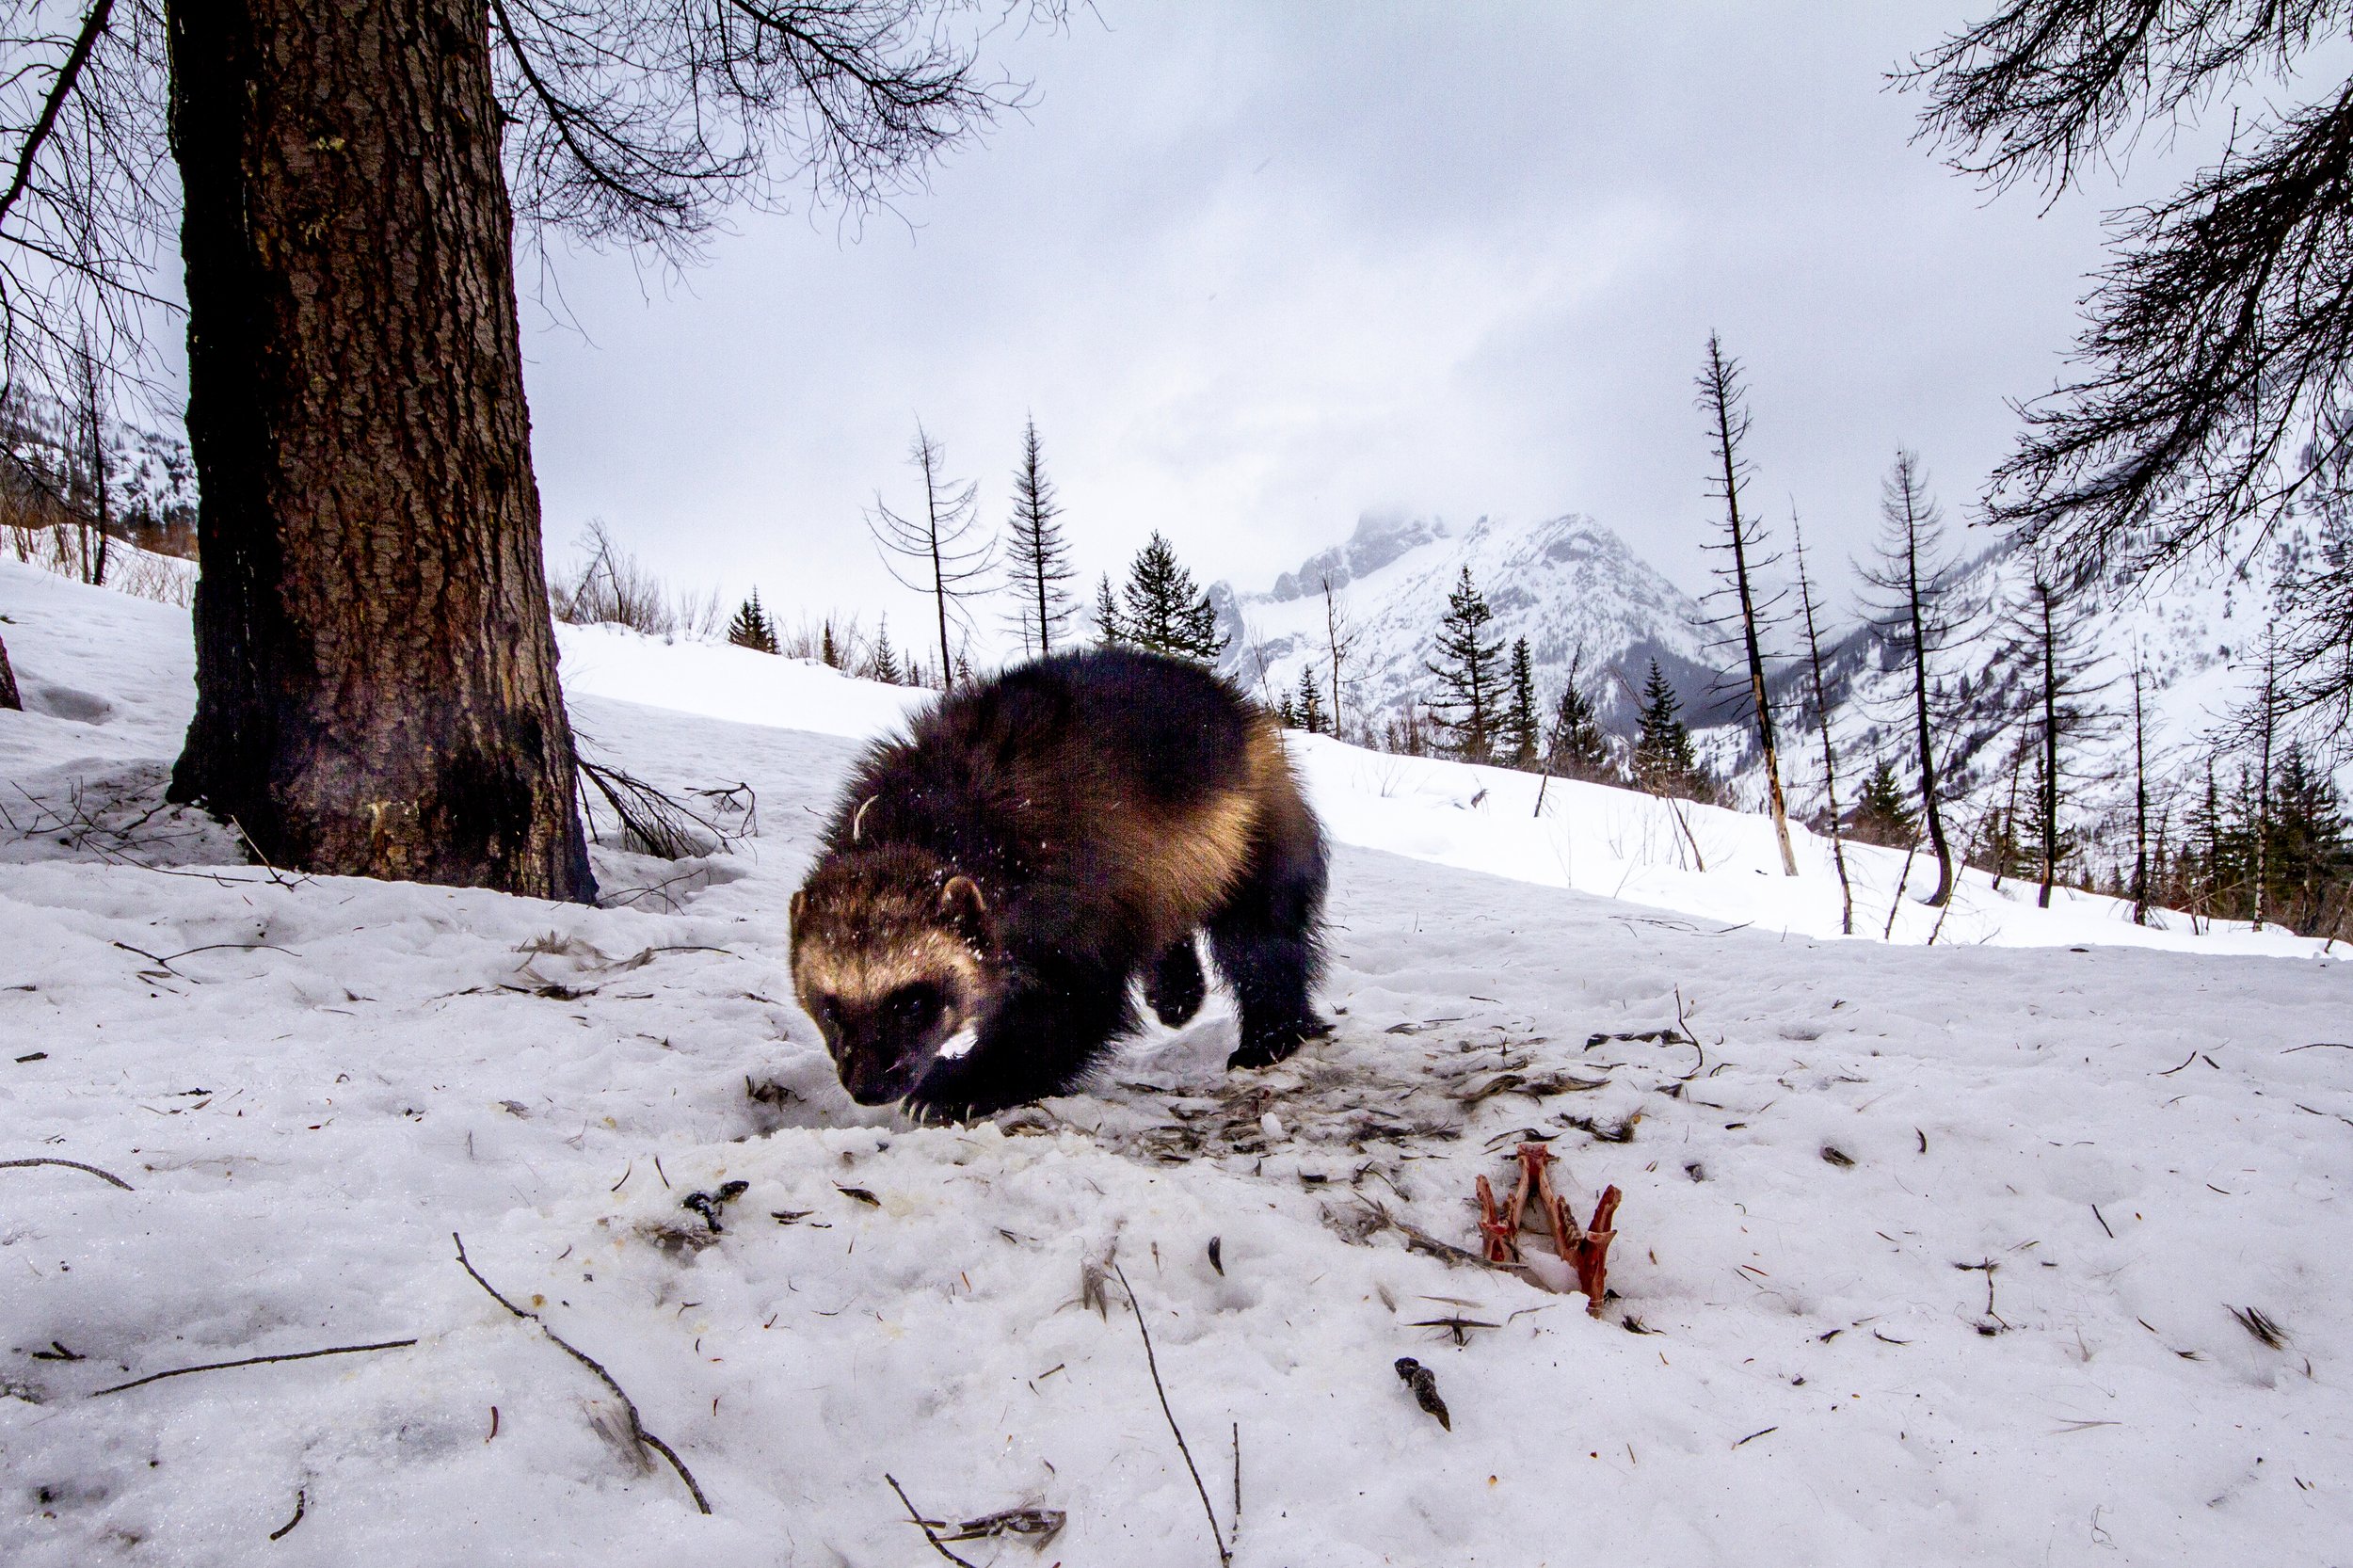  A wolverine visits a CWP research station in the Lake Chelan watershed in the North Cascades. 